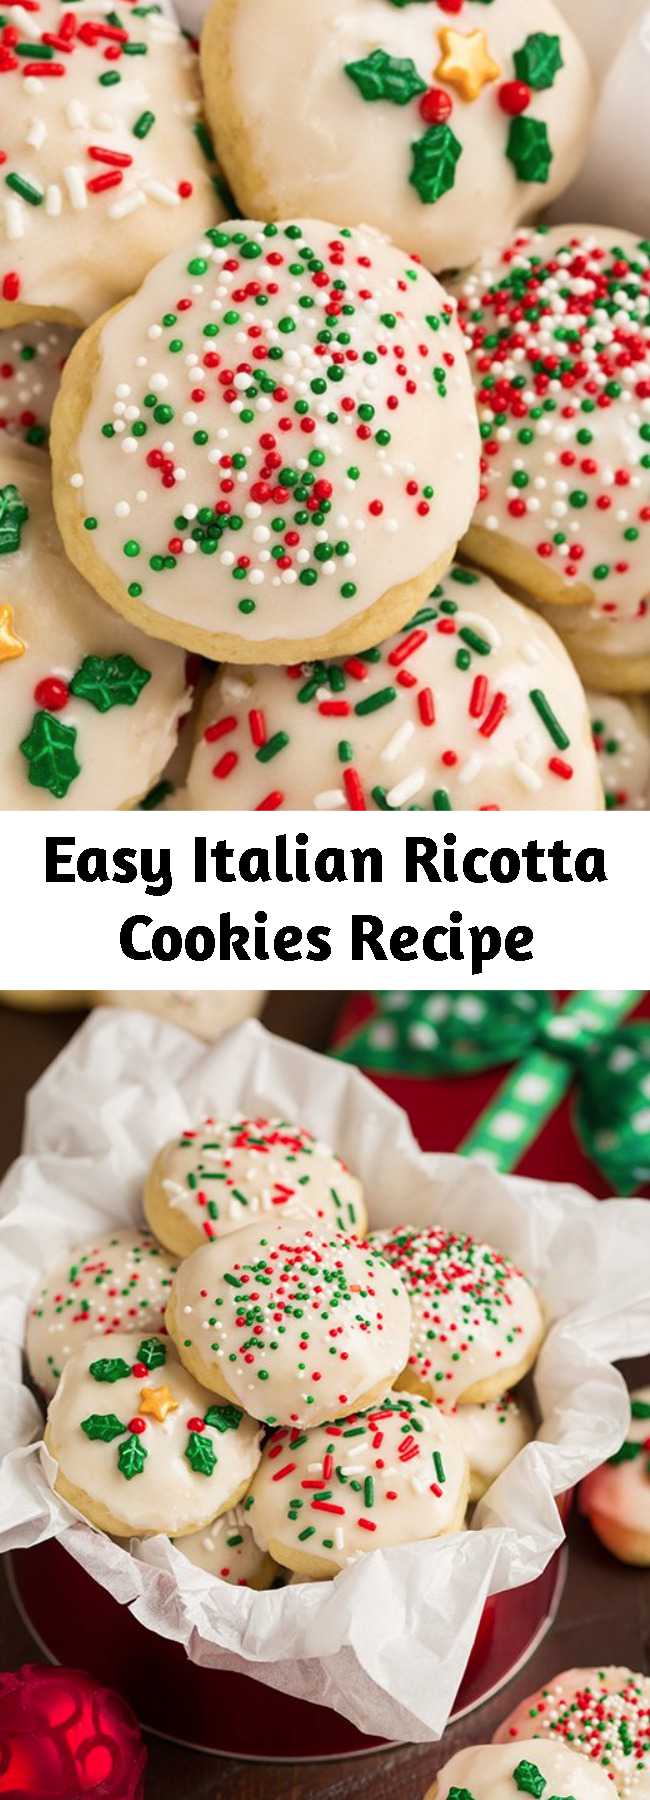 Easy Italian Ricotta Cookies Recipe - Soft and fluffy, melt-in-your-mouth cookies made with rich ricotta (for moisture and flavor) and finished with a sweet glaze. These are so good you can never stop at just one! They’re holiday classic and such a fun recipe to try if you’ve never made them. The dough can be made two days in advance so it’s a great make ahead recipe.